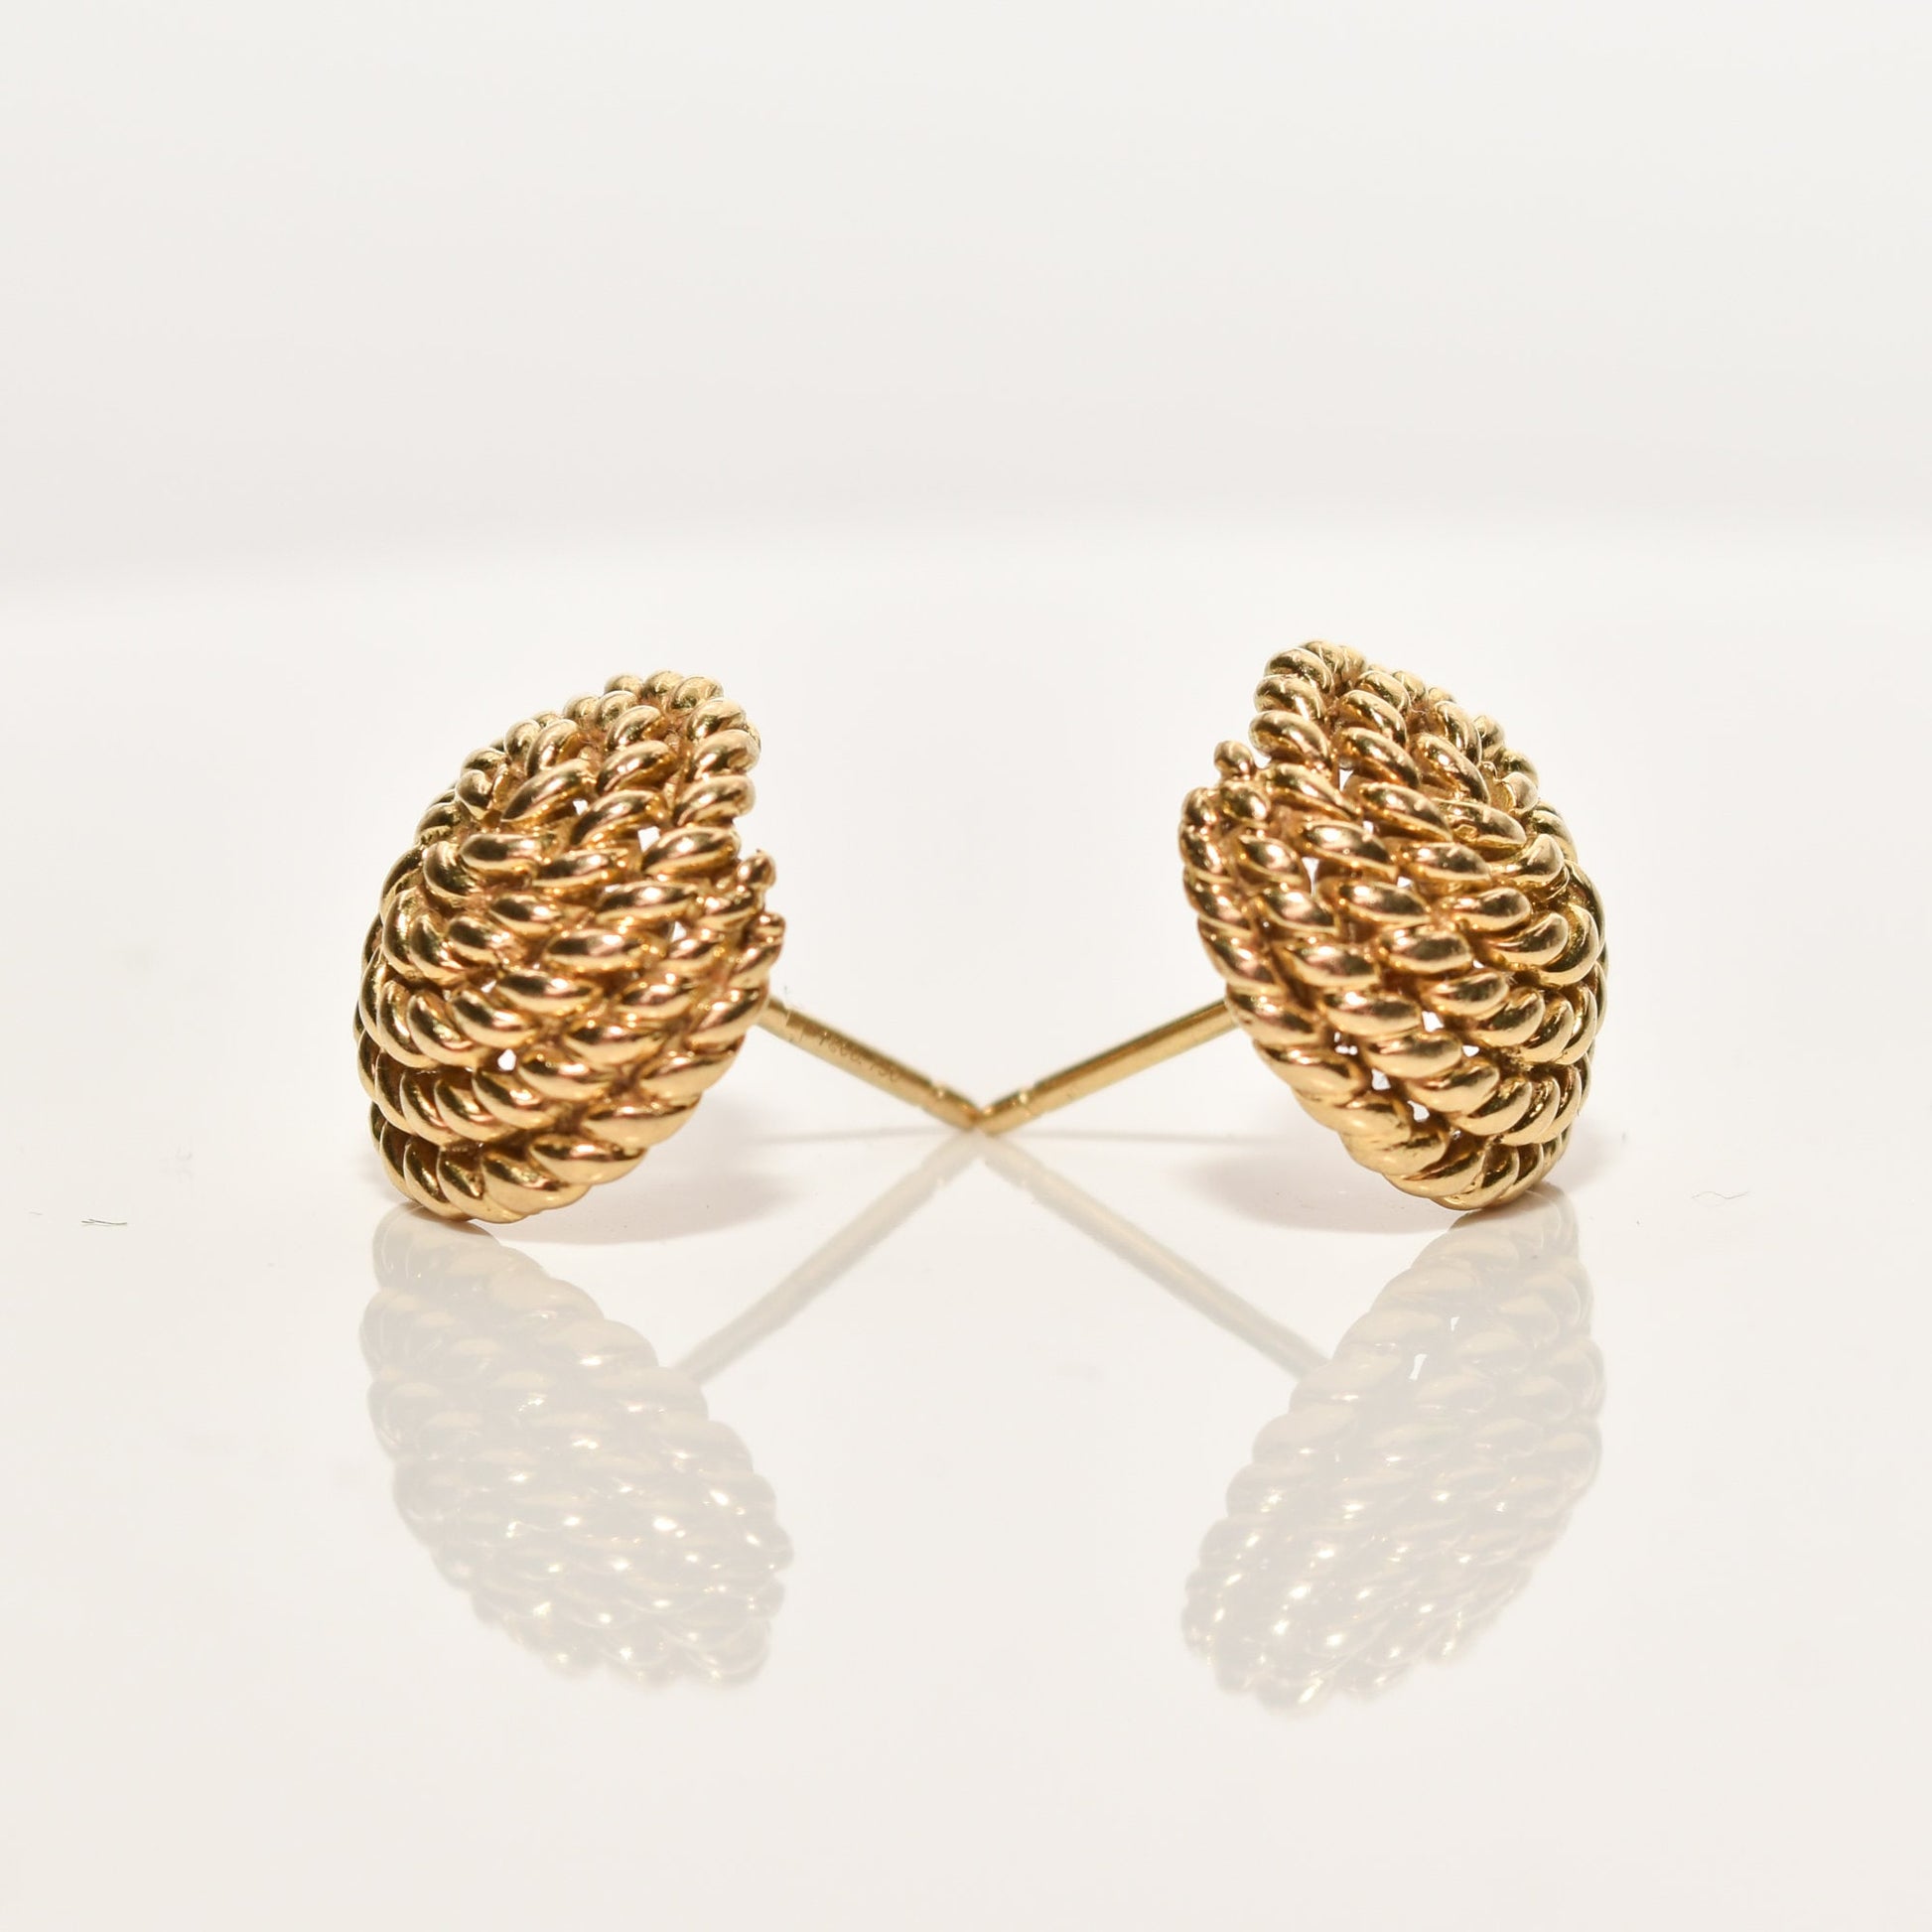 Alt text: "Tiffany & Co Schlumberger 18K gold woven button stud earrings with coiled rope design, positioned side by side with reflection on a shiny surface, measuring 14.5mm, from an estate jewelry collection.